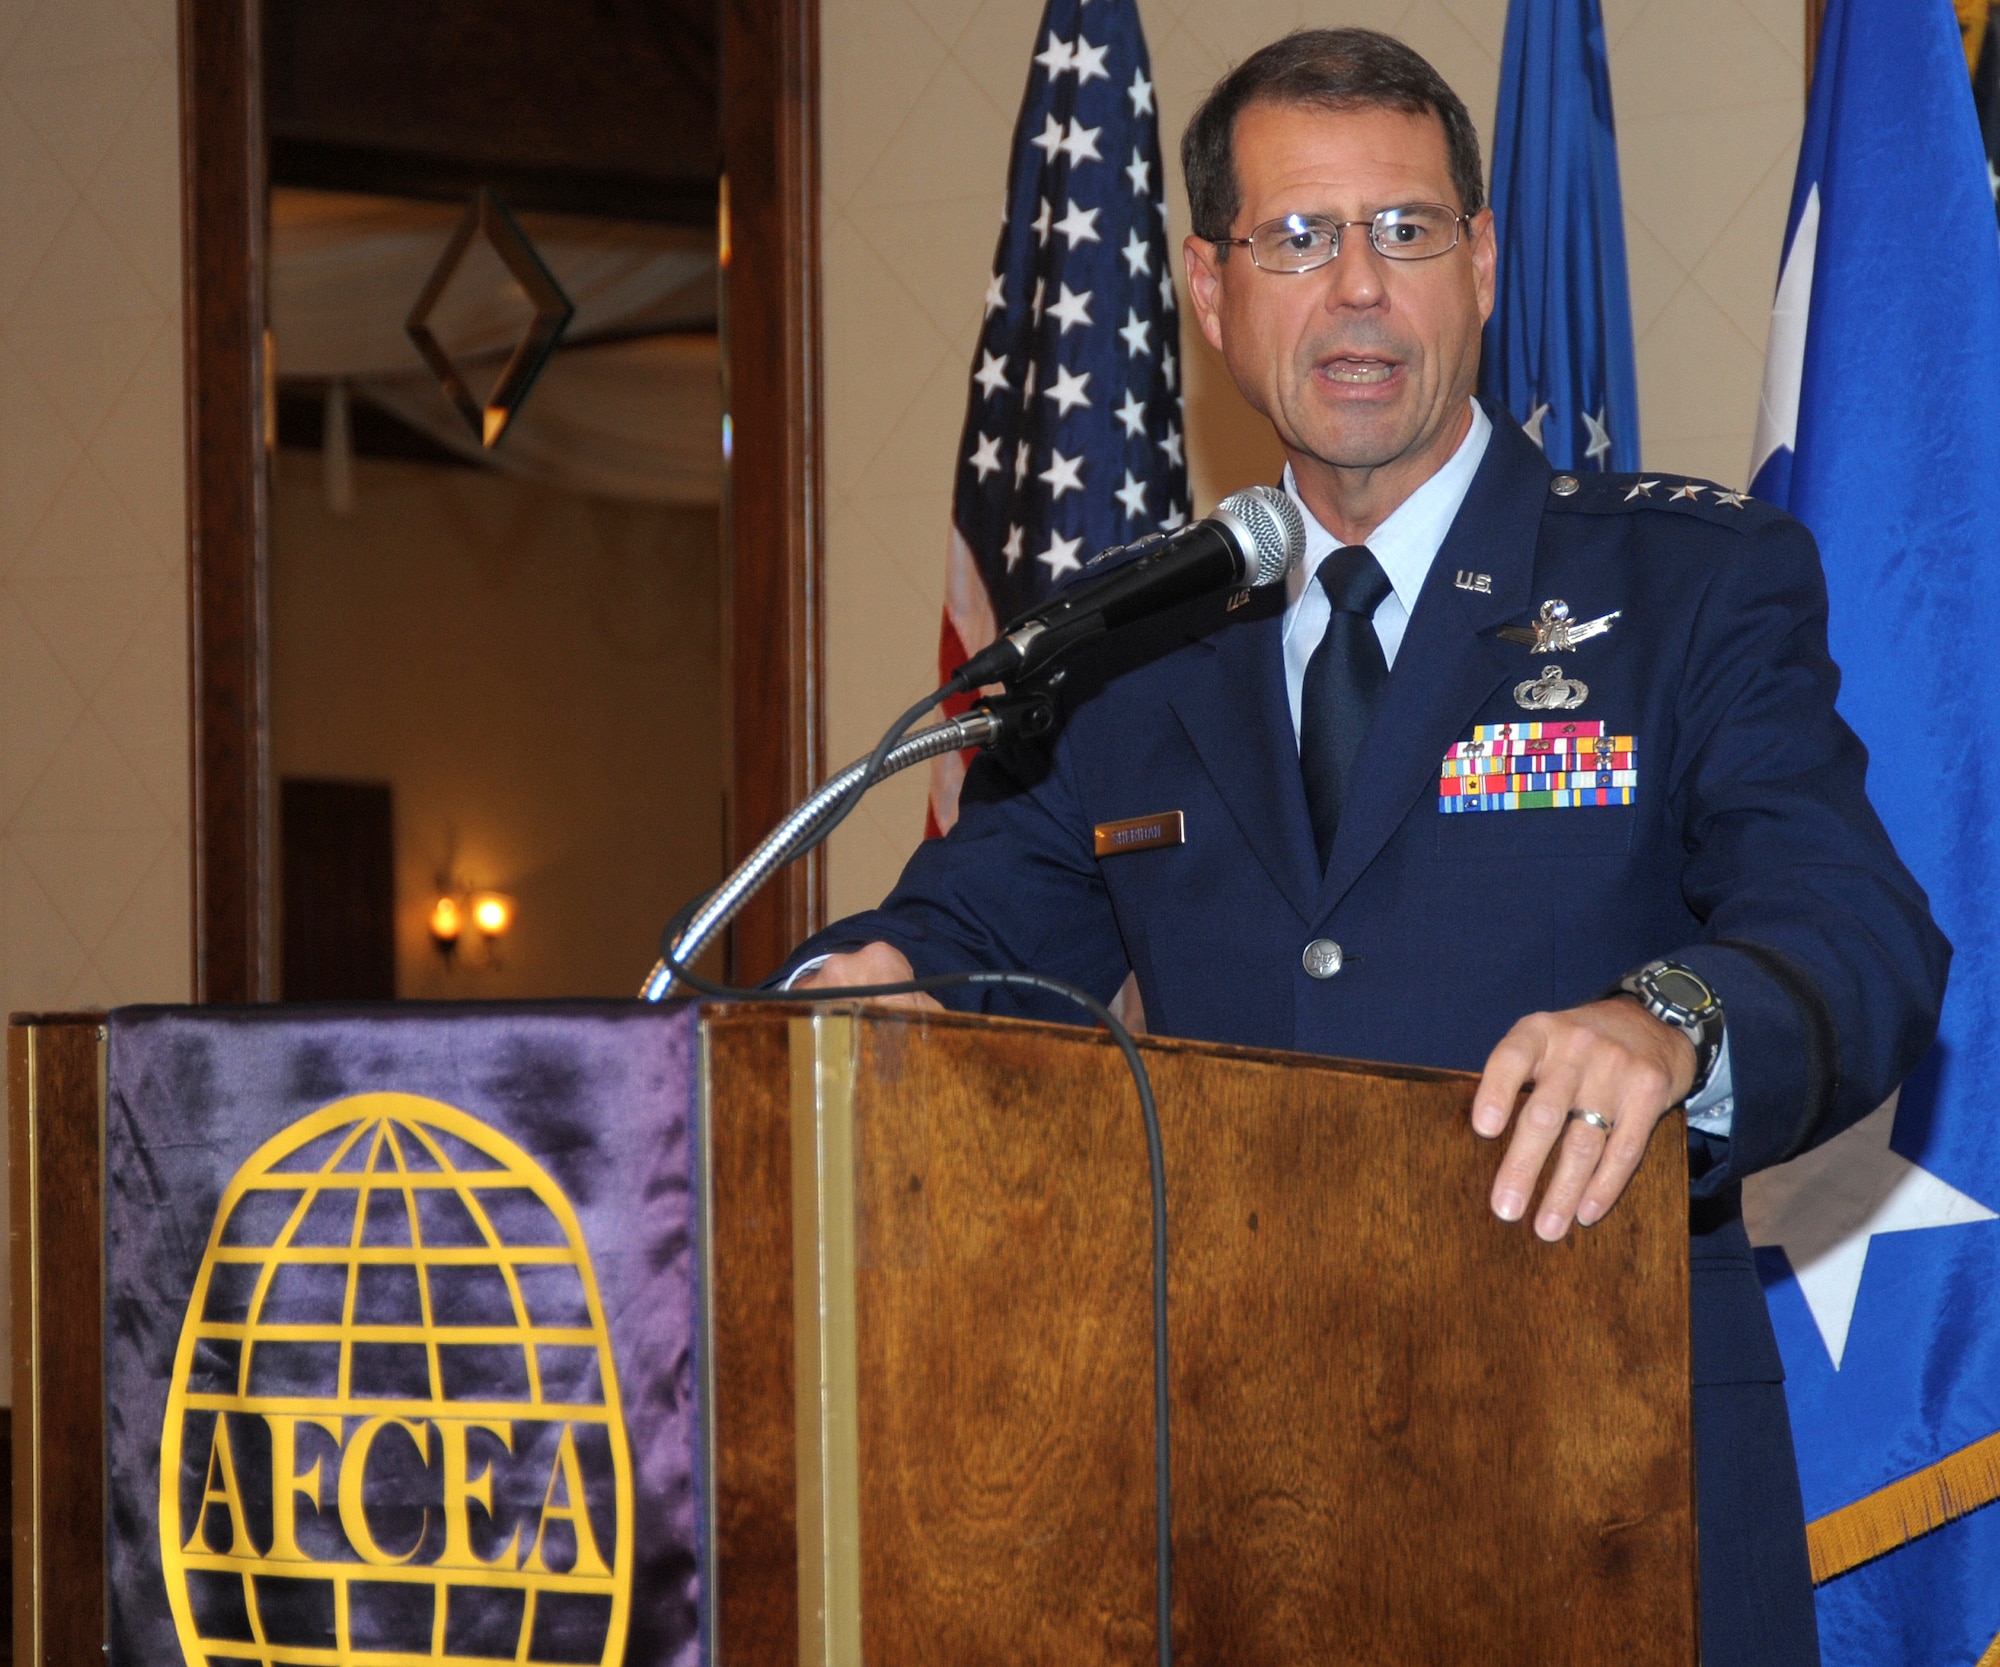 Keynote speaker Lt. Gen. Tom Sheridan, Space and Missile Systems Center commander, addresses the attendees during the Armed Forces Communications and Electronics Association’s award luncheon last month. The AFCEA’s Los Angeles Chapter presented scholarships and monetary awards to military recipients in the local area. (Photo by Atiba Copeland)